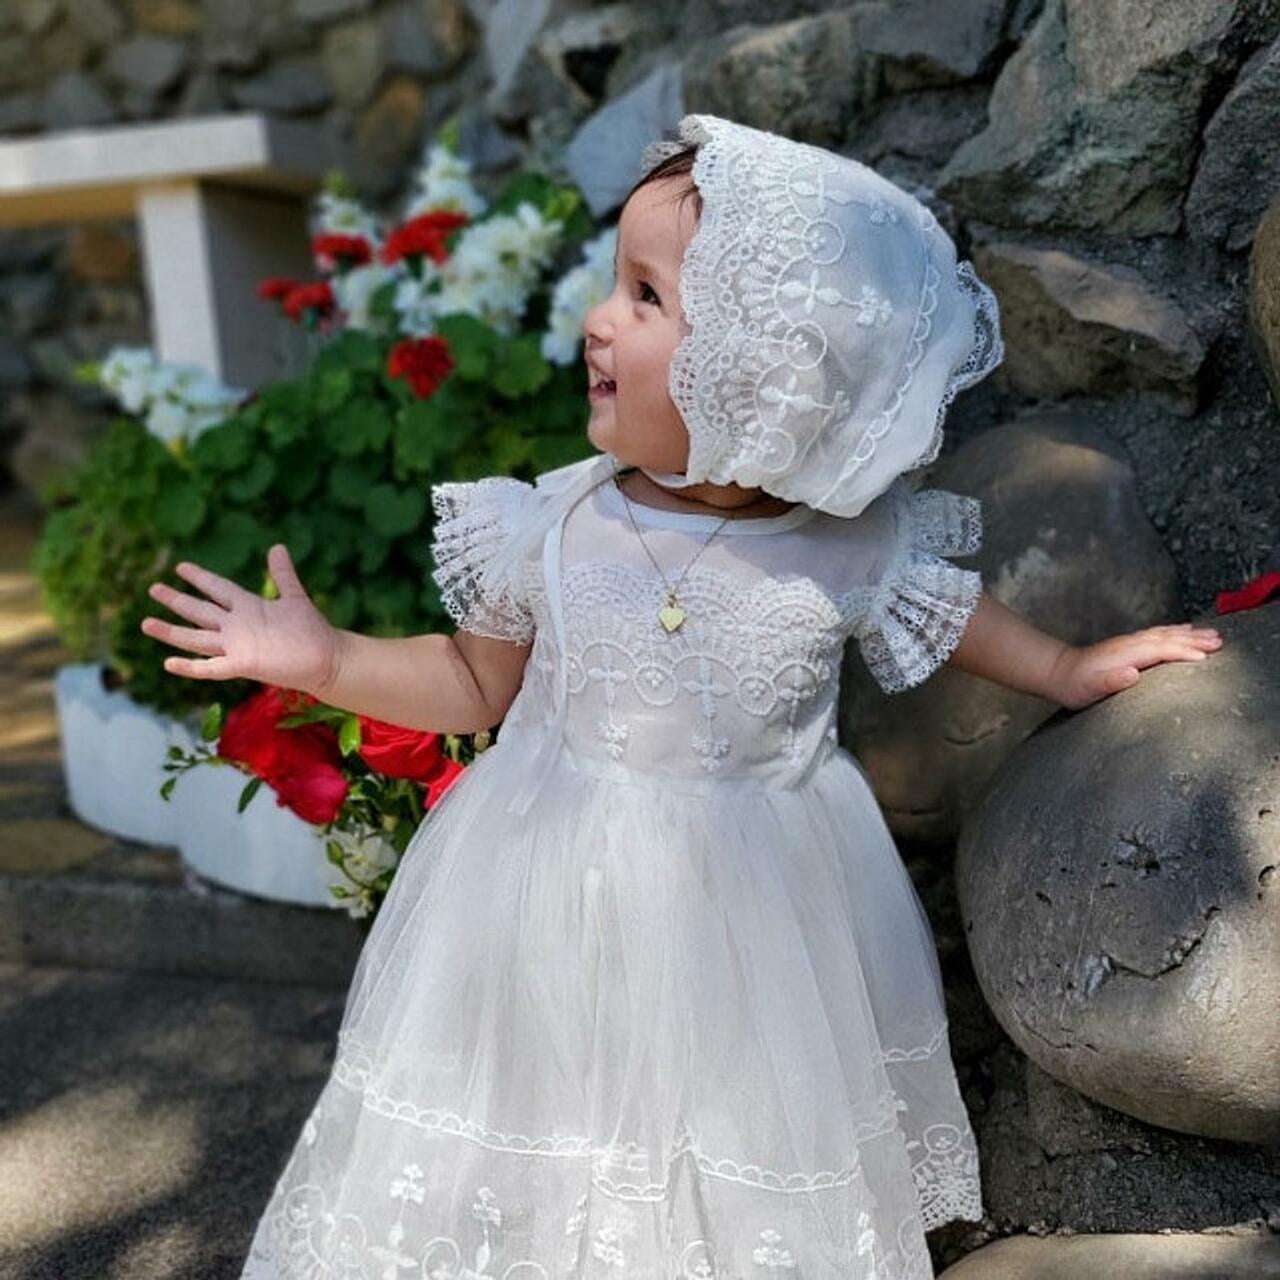 Baby Girl Toddler Flower Party Embroidered Christening Baptism Dress Gown Outfit 